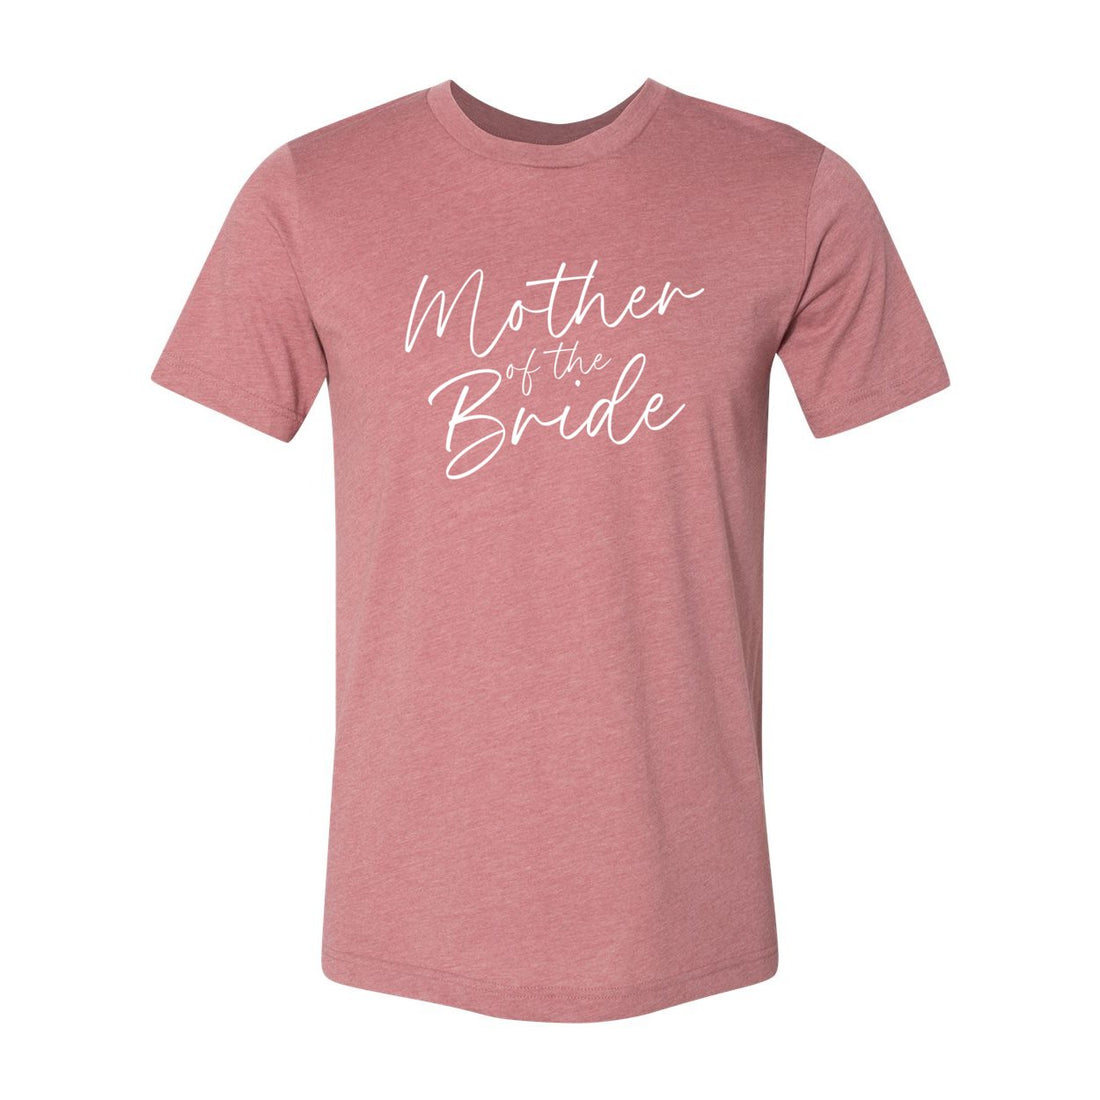 #9 Signature Mother of Bride Short Sleeve Jersey Tee - T-Shirts - Positively Sassy - #9 Signature Mother of Bride Short Sleeve Jersey Tee